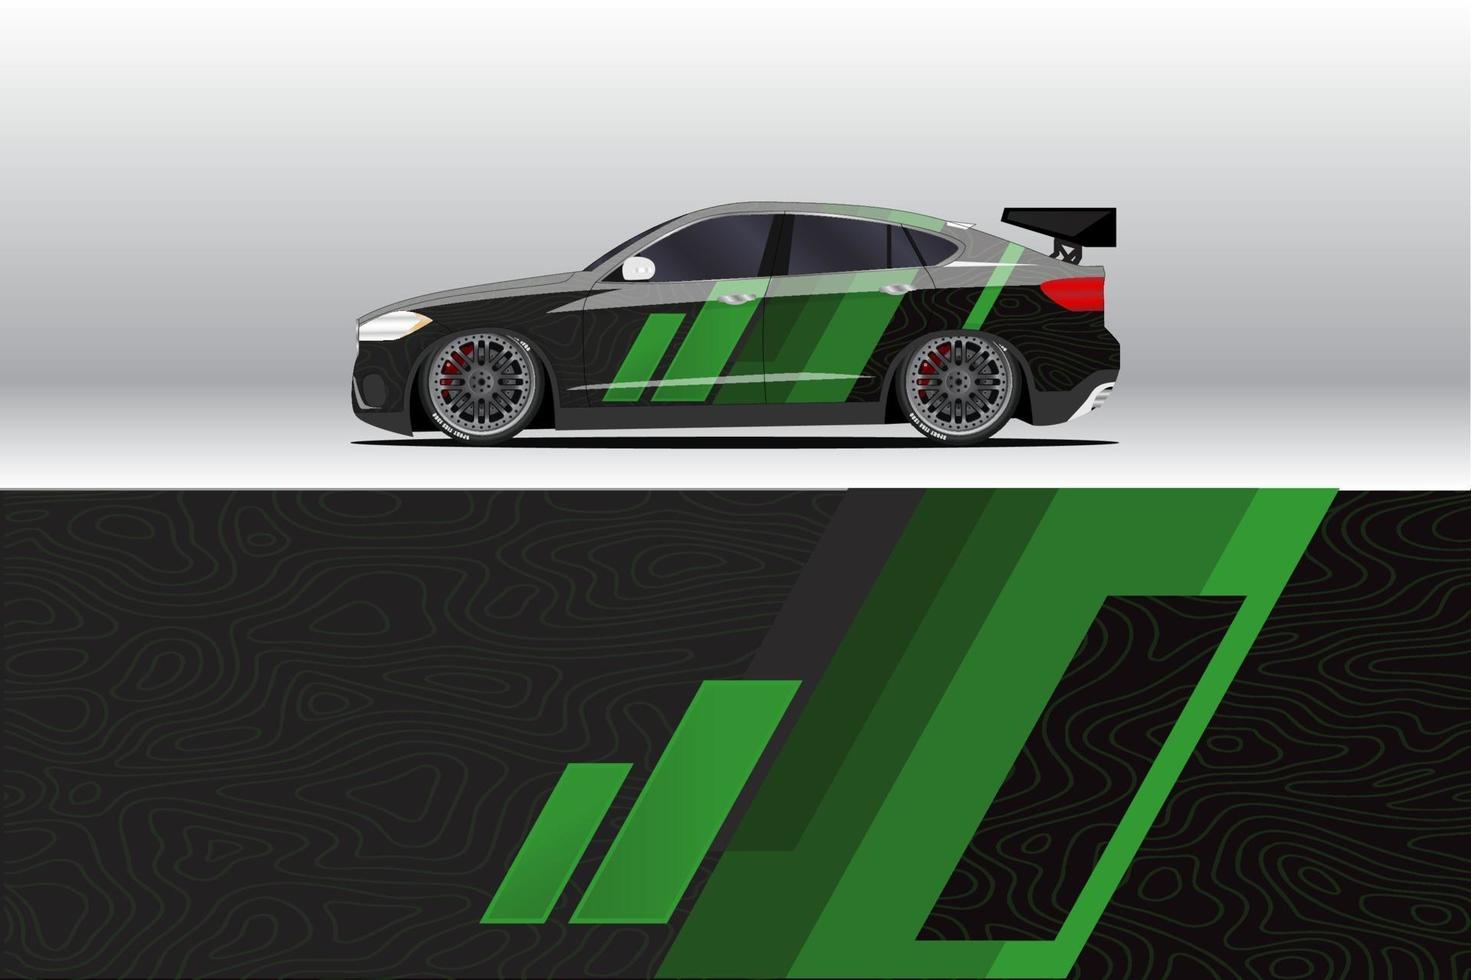 Car wrap decal designs. for racing livery or daily car vinyl sticker. vector